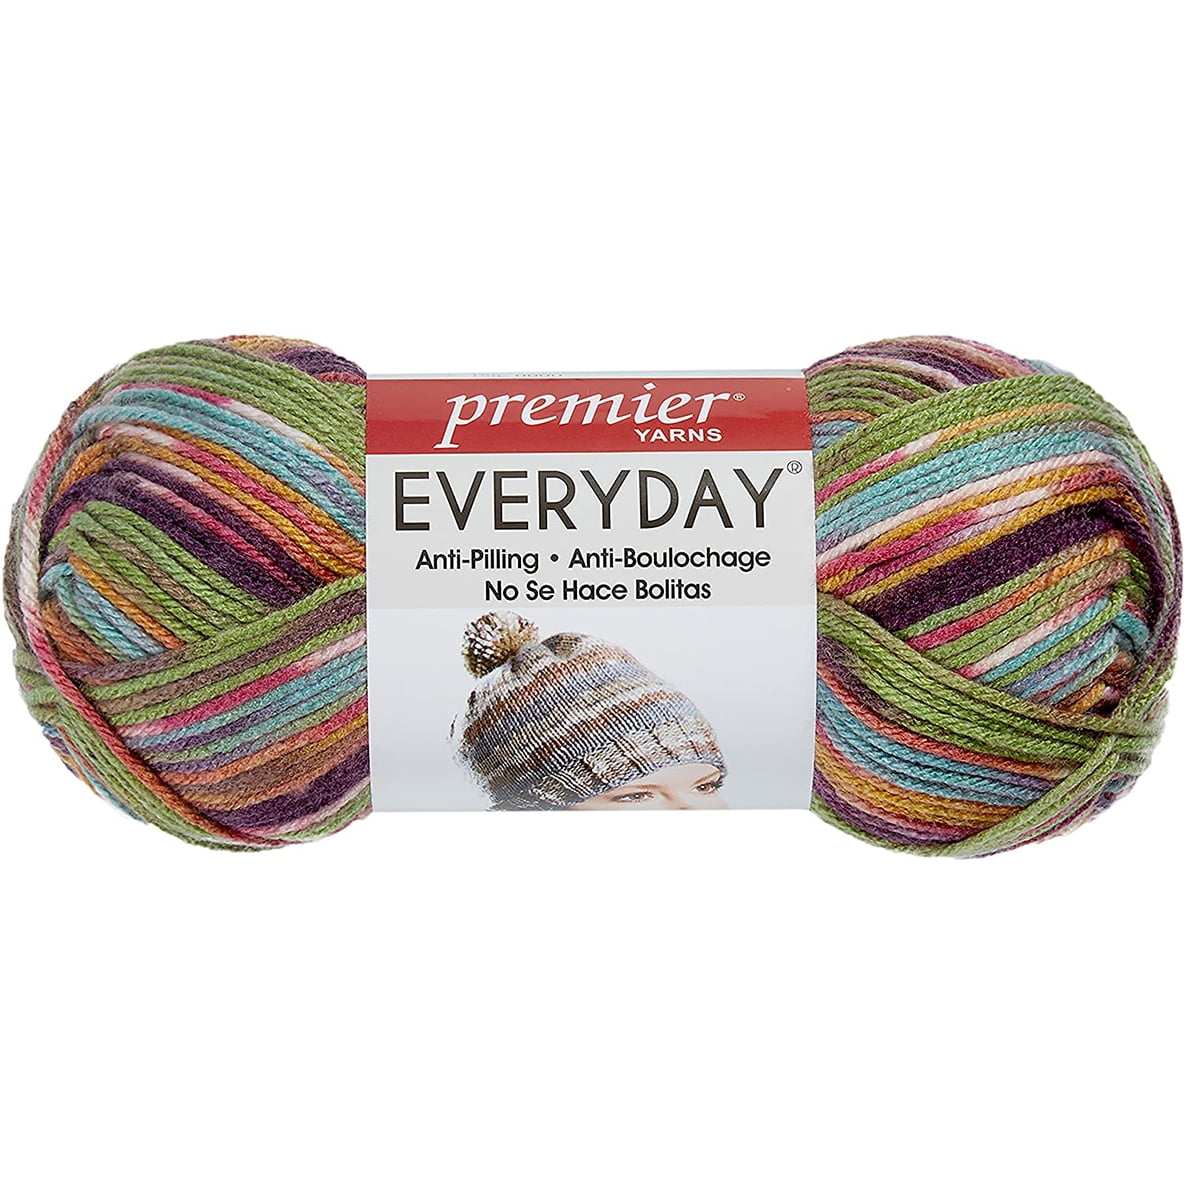 Premier Anti-Pilling Everyday® Worsted – Premier Yarns